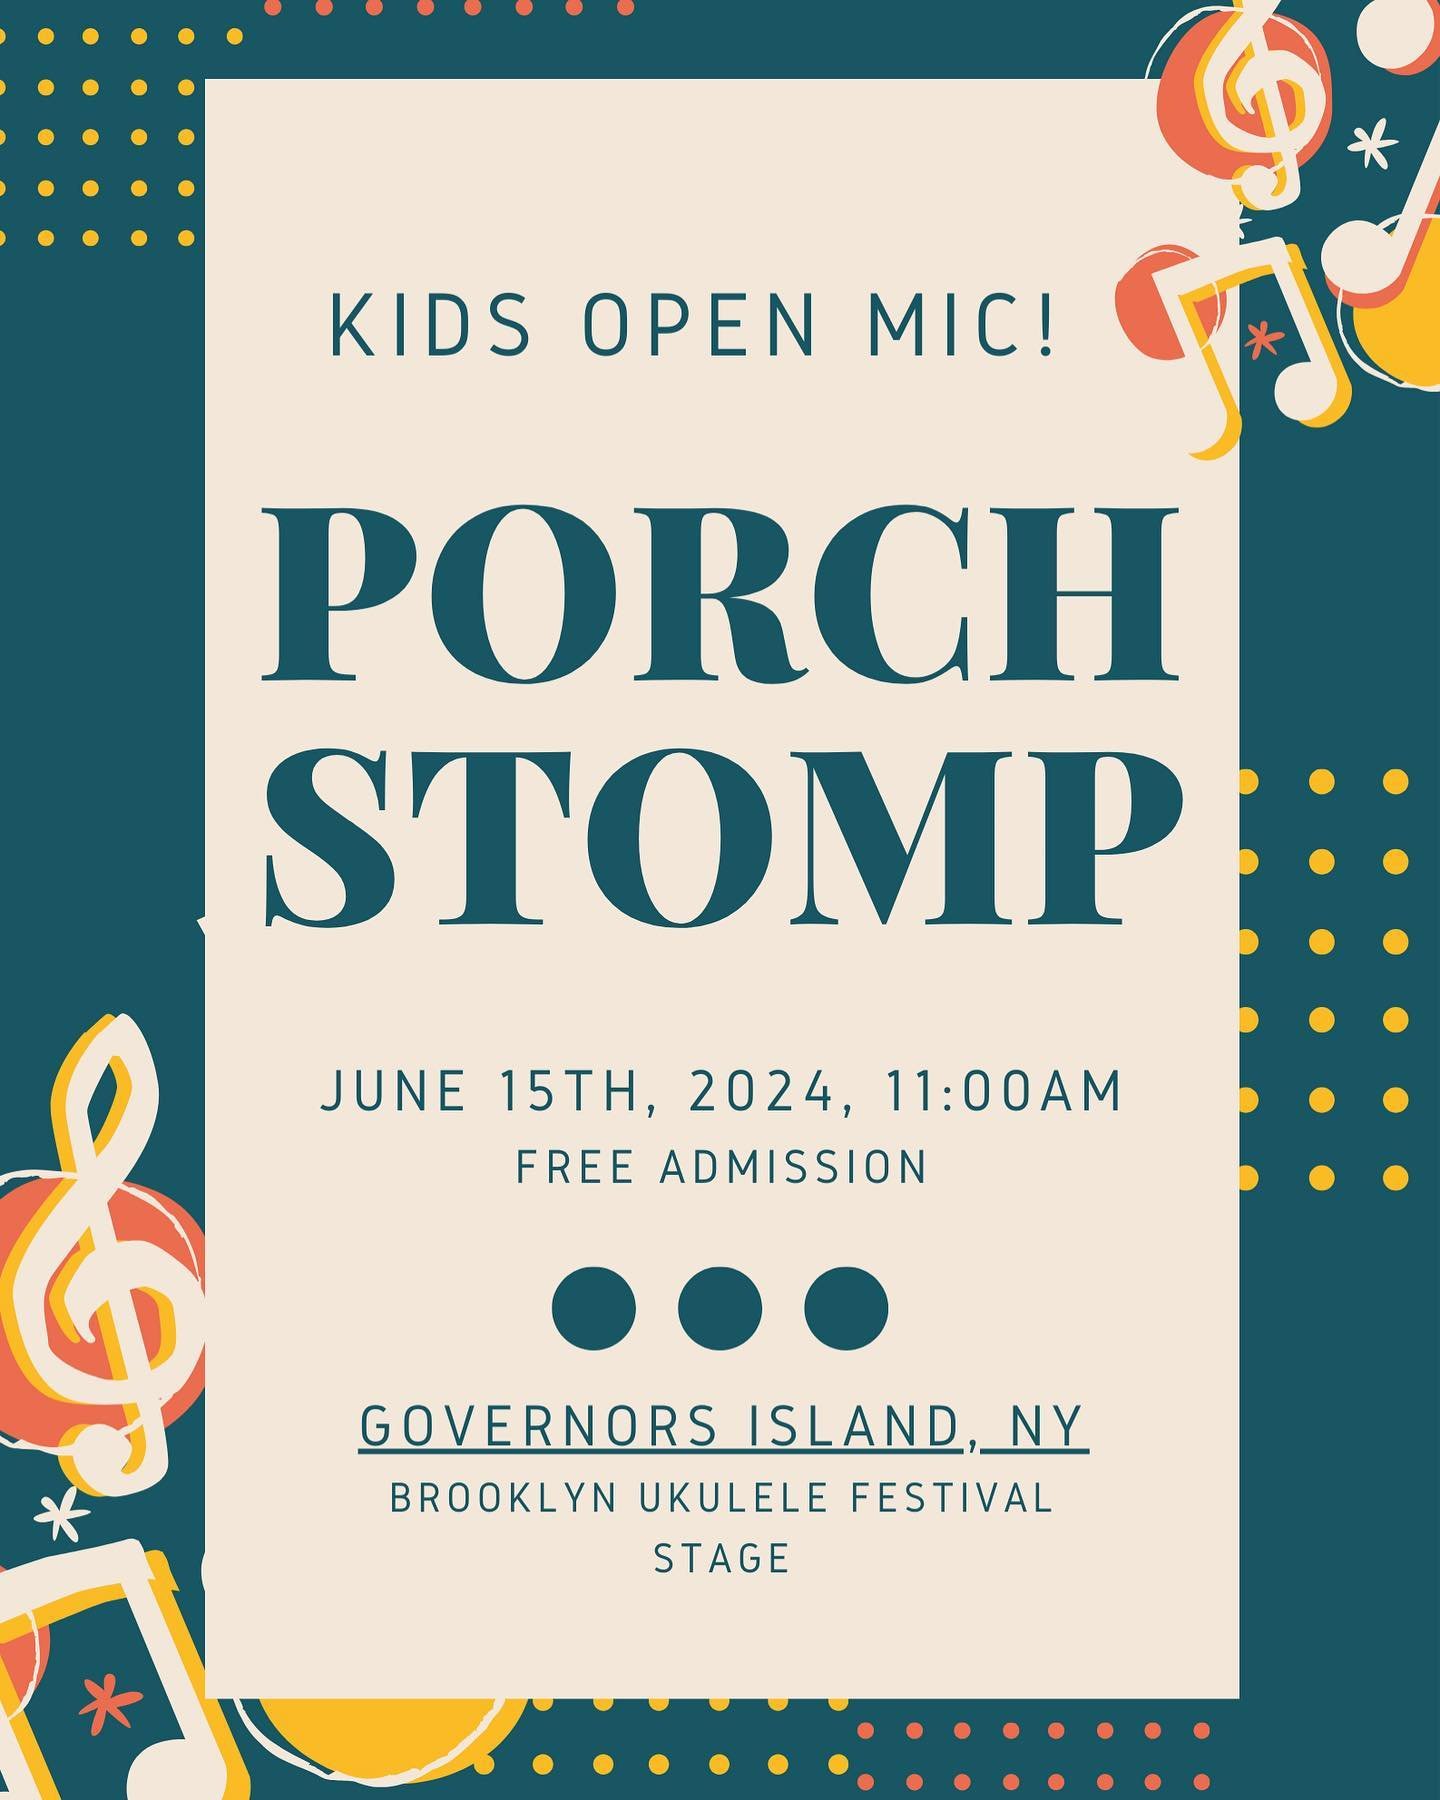 For the Kids!! We are doing a Kids Open Mic at the Brooklyn Ukulele Festival Stage at Porchstomp this year! Bring your &lsquo;A&rsquo; material and see you on Governor&rsquo;s Island!

@brooklynukefest @porchstomp @gwendolynfitzmusic 

#kidsopenmic #